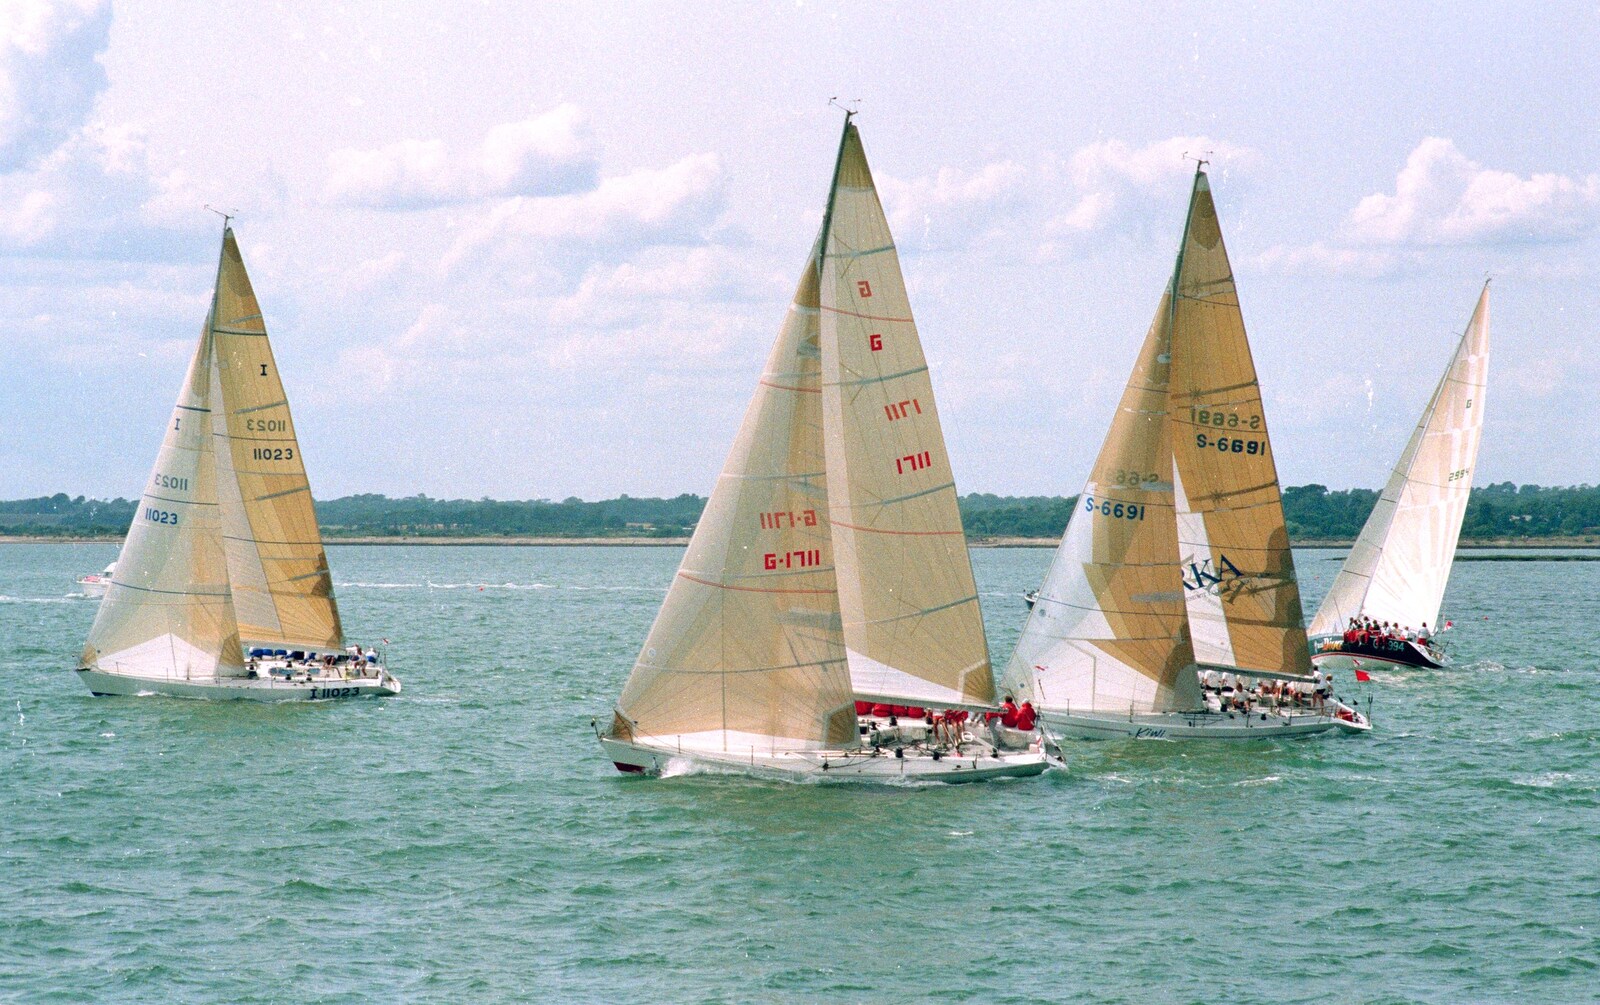 Racing yachts from Back from Uni: Yarmouth, Alum Bay and Barton-on-sea, Hampshire - 23rd July 1989